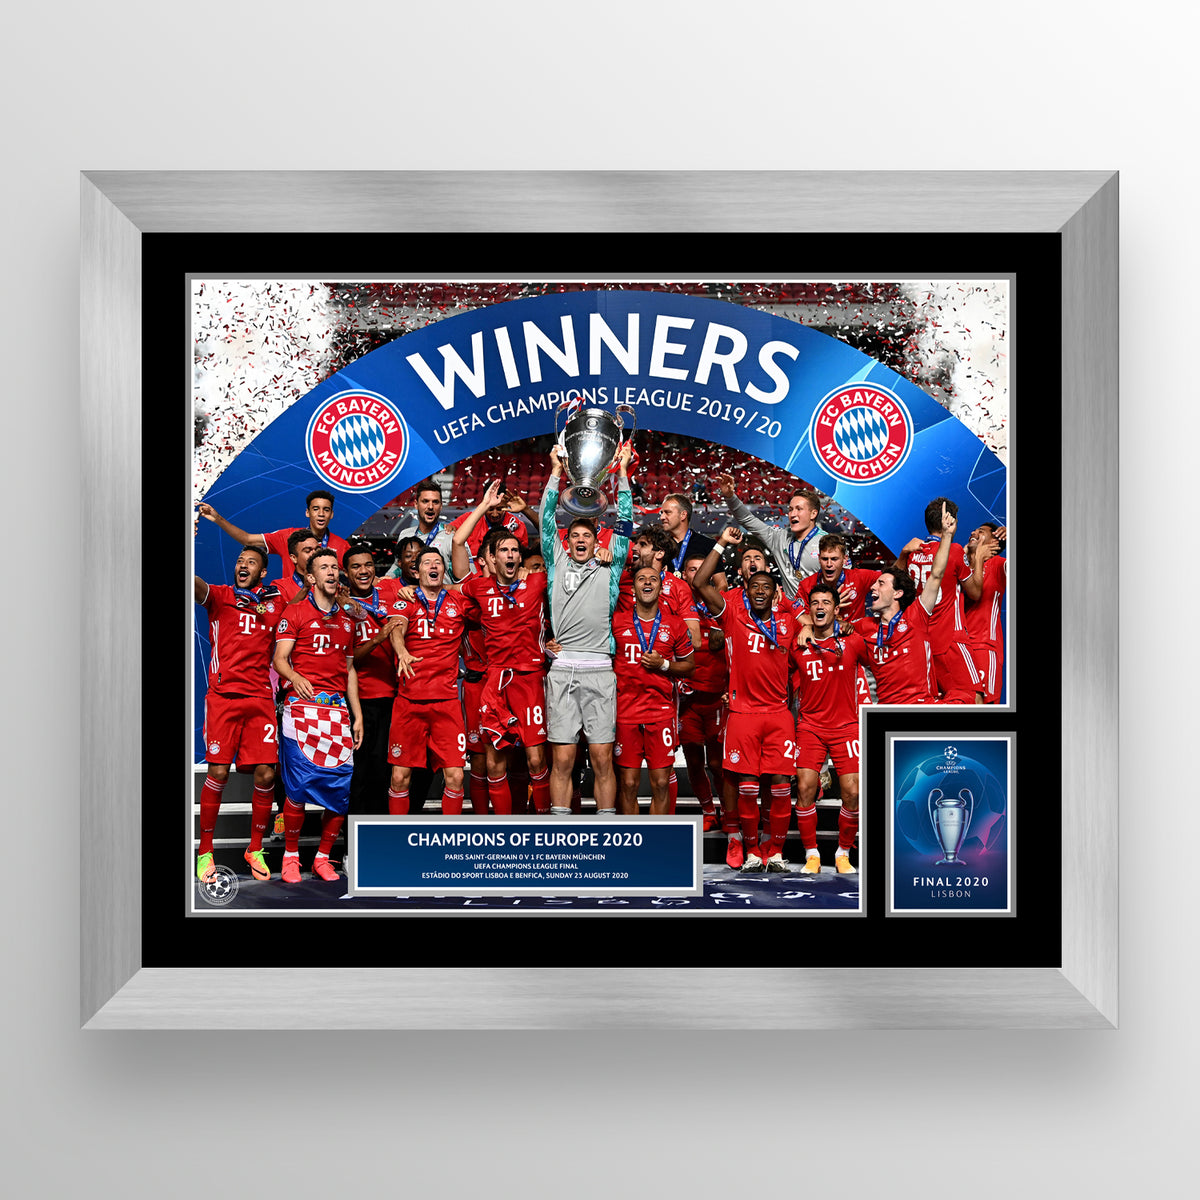 UEFA Champions League 2020 Final - Winner: Bayern Munich - Silver Frame UEFA Club Competitions Online Store